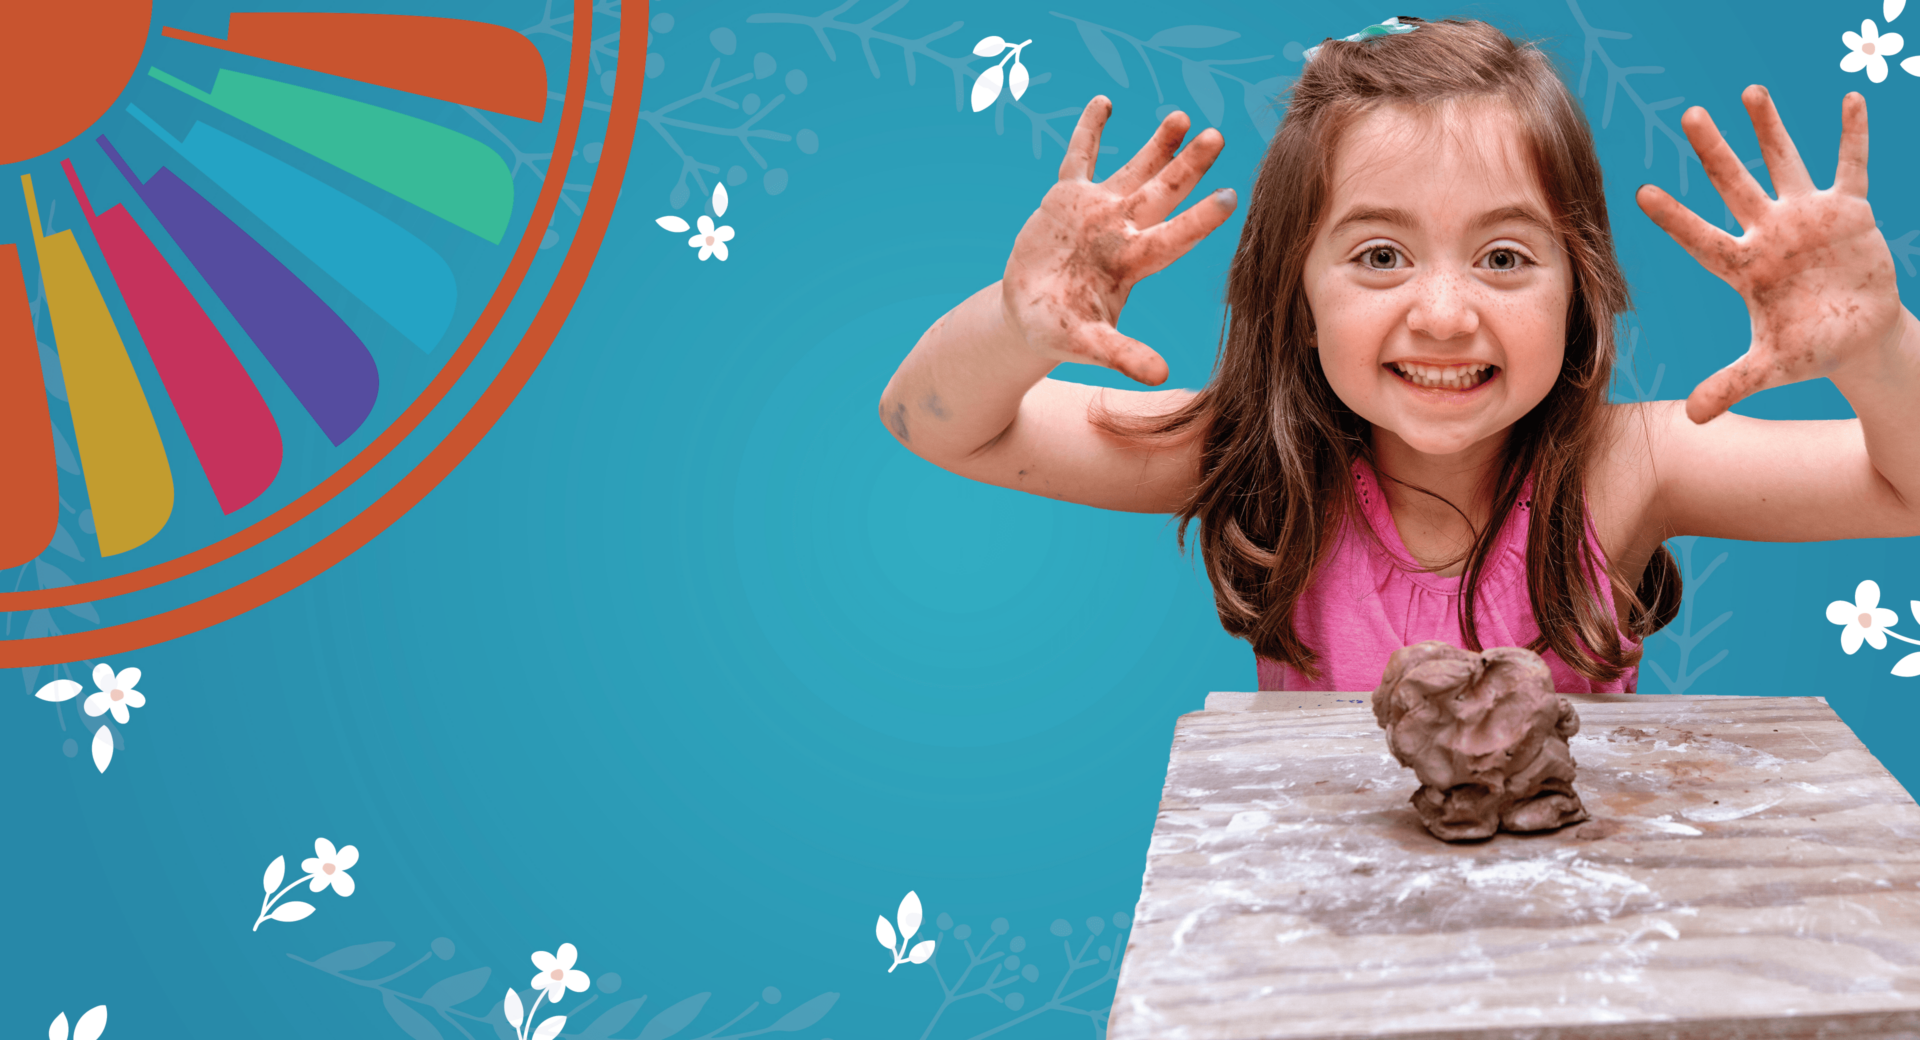 A cheerful young girl showing her paint-covered hands with a lump of brown clay on the table in front of her.